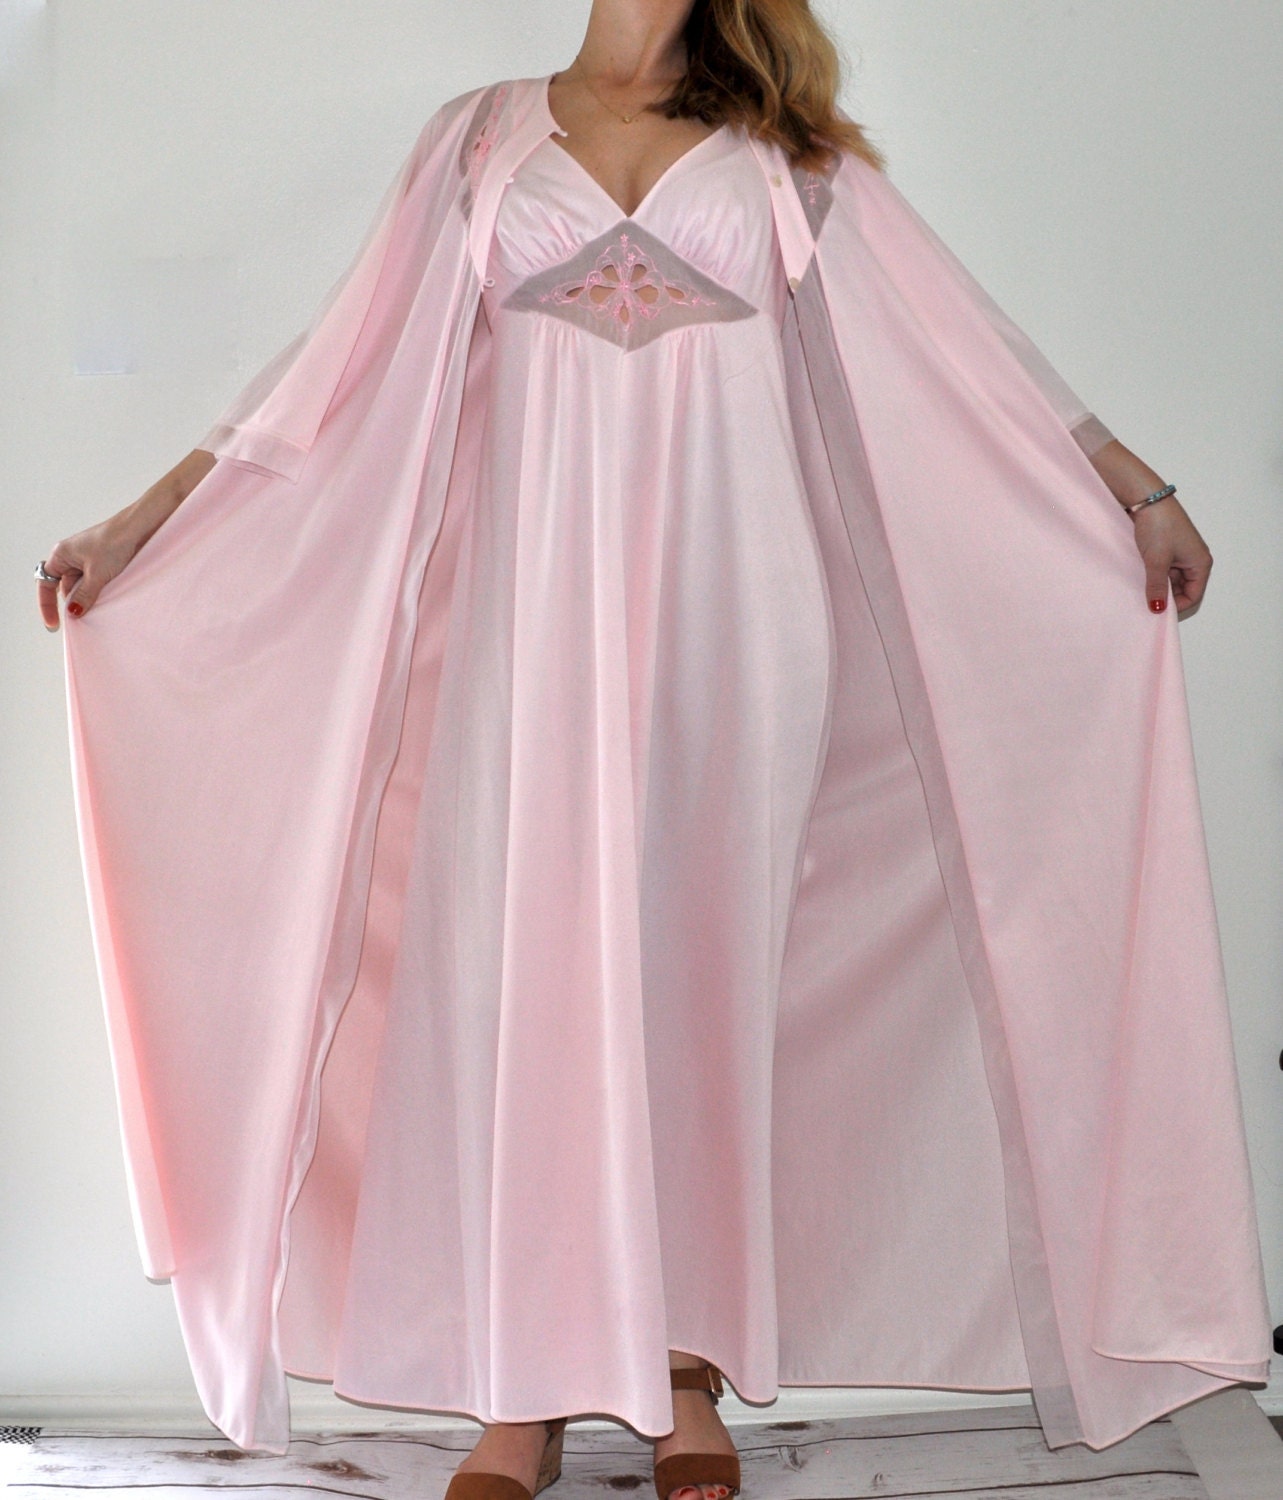 Glamourous Silky 2-piece Vintage Pink Lingerie Set. Nightgown